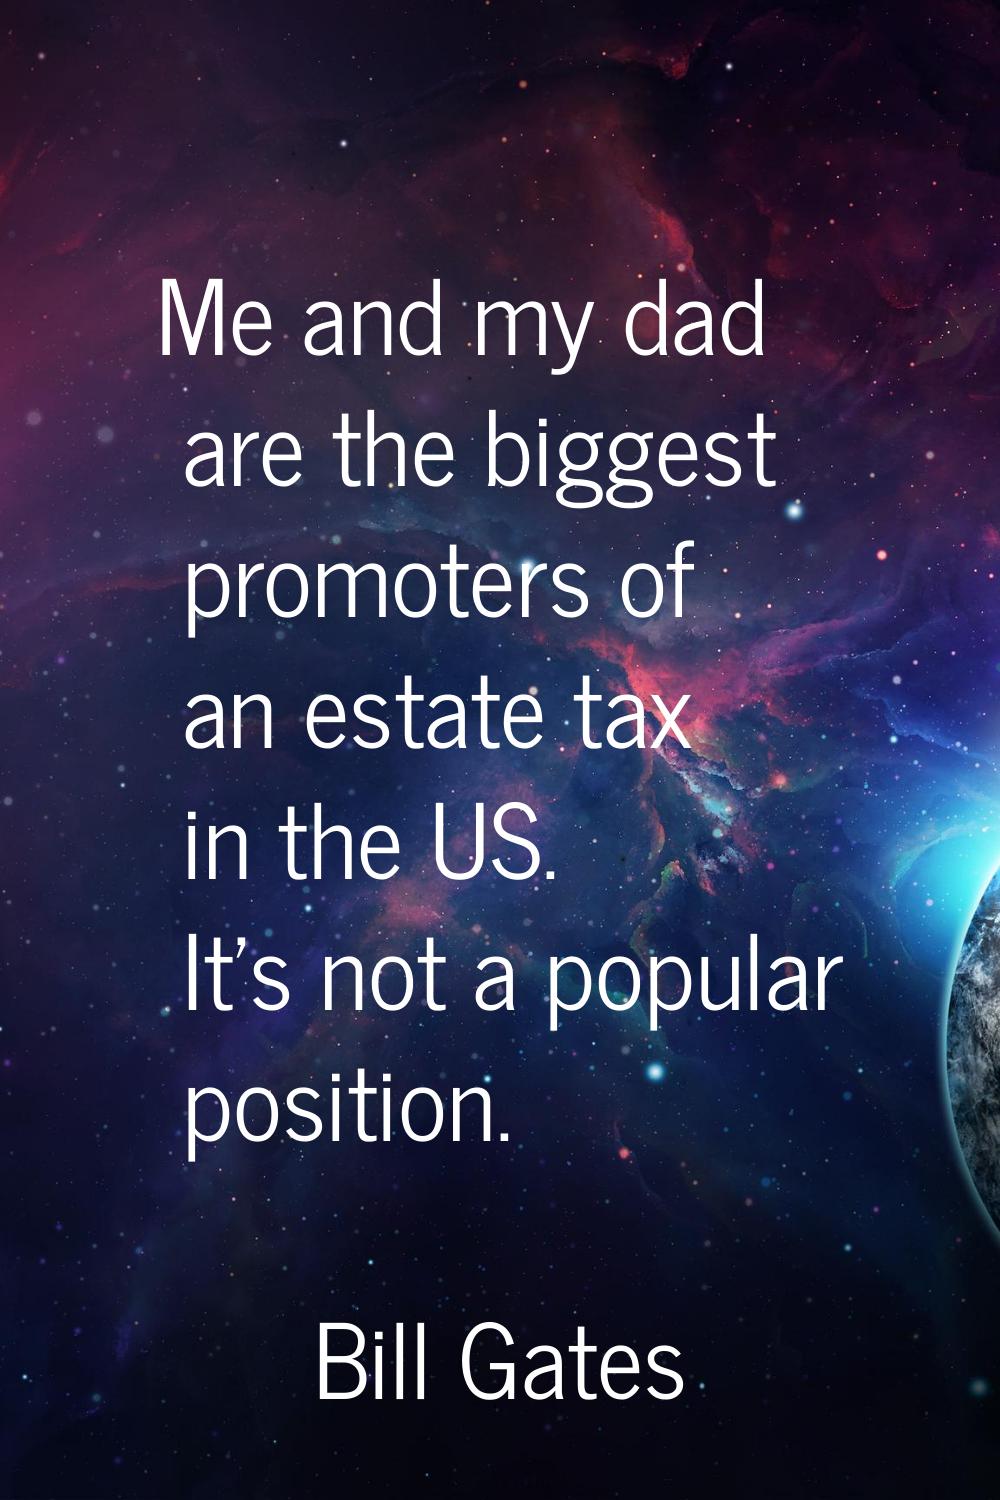 Me and my dad are the biggest promoters of an estate tax in the US. It's not a popular position.